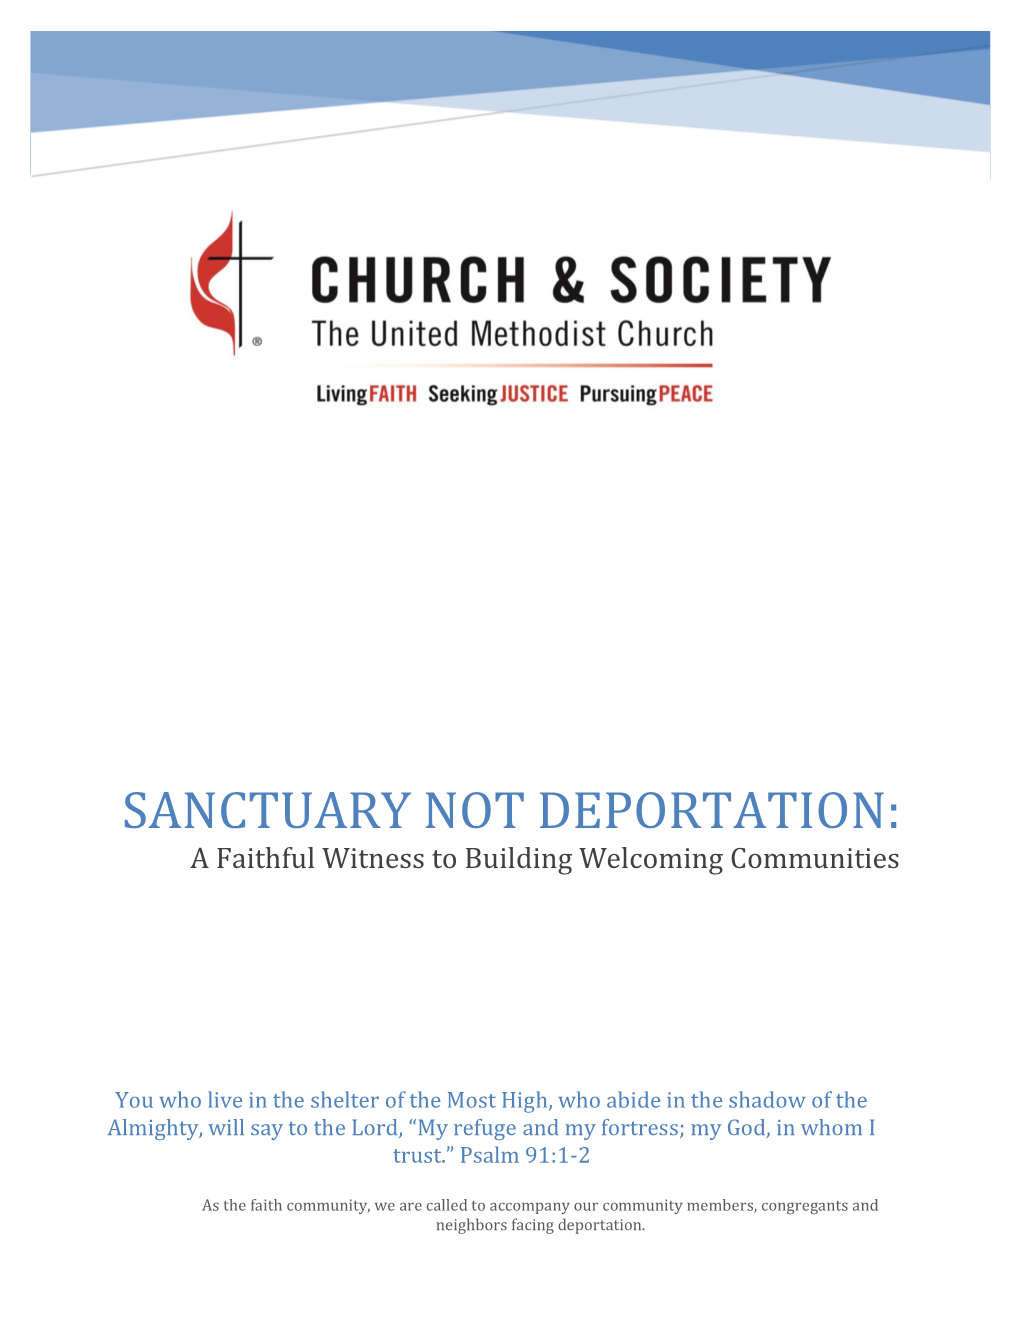 SANCTUARY NOT DEPORTATION: a Faithful Witness to Building Welcoming Communities